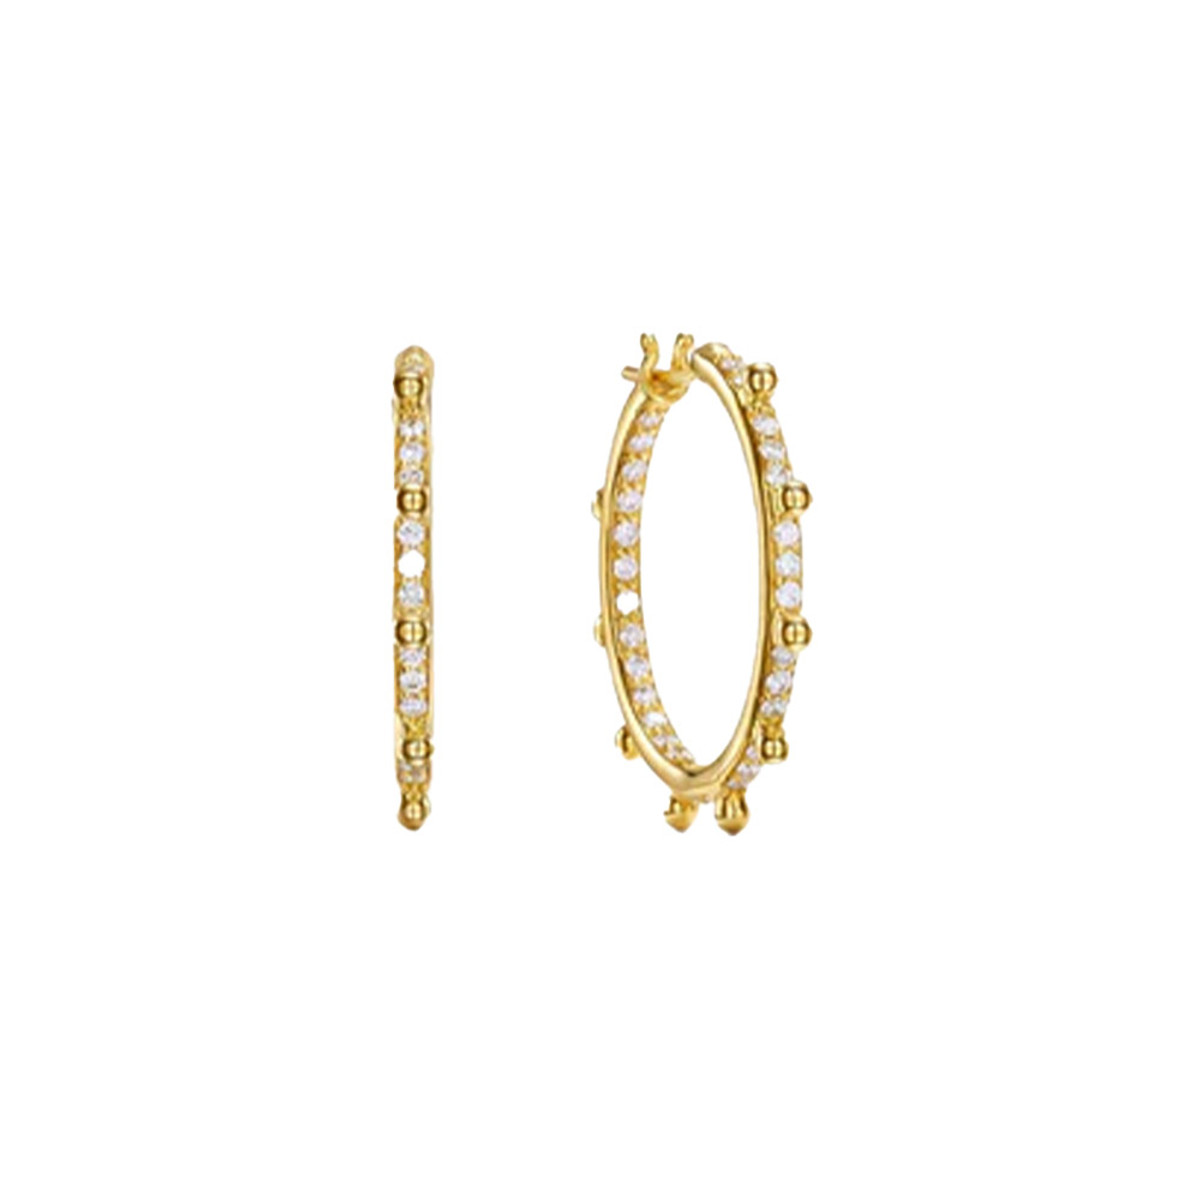 Temple St. Clair 18K Yellow Gold Pave Granulated Hoops-61263 Product Image